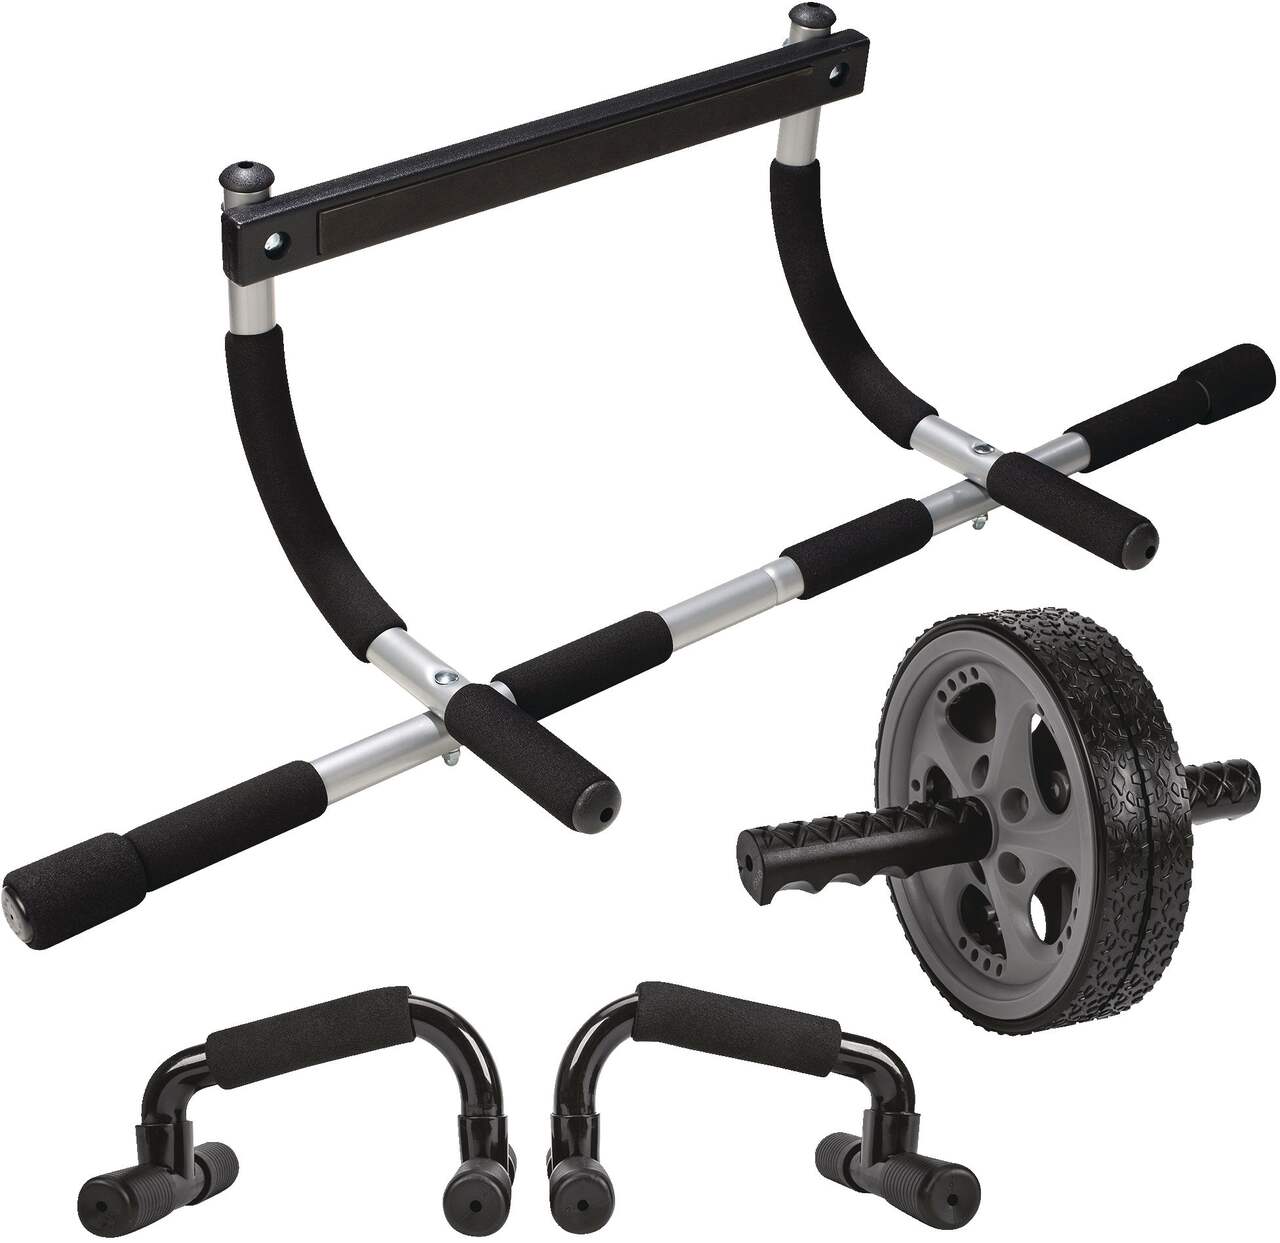 https://media-www.canadiantire.ca/product/playing/exercise/exercise-accessories/1840631/goodlife-ultimate-workout-kit-3e83fe55-7500-4043-8af4-b5813269989e-jpgrendition.jpg?imdensity=1&imwidth=640&impolicy=mZoom